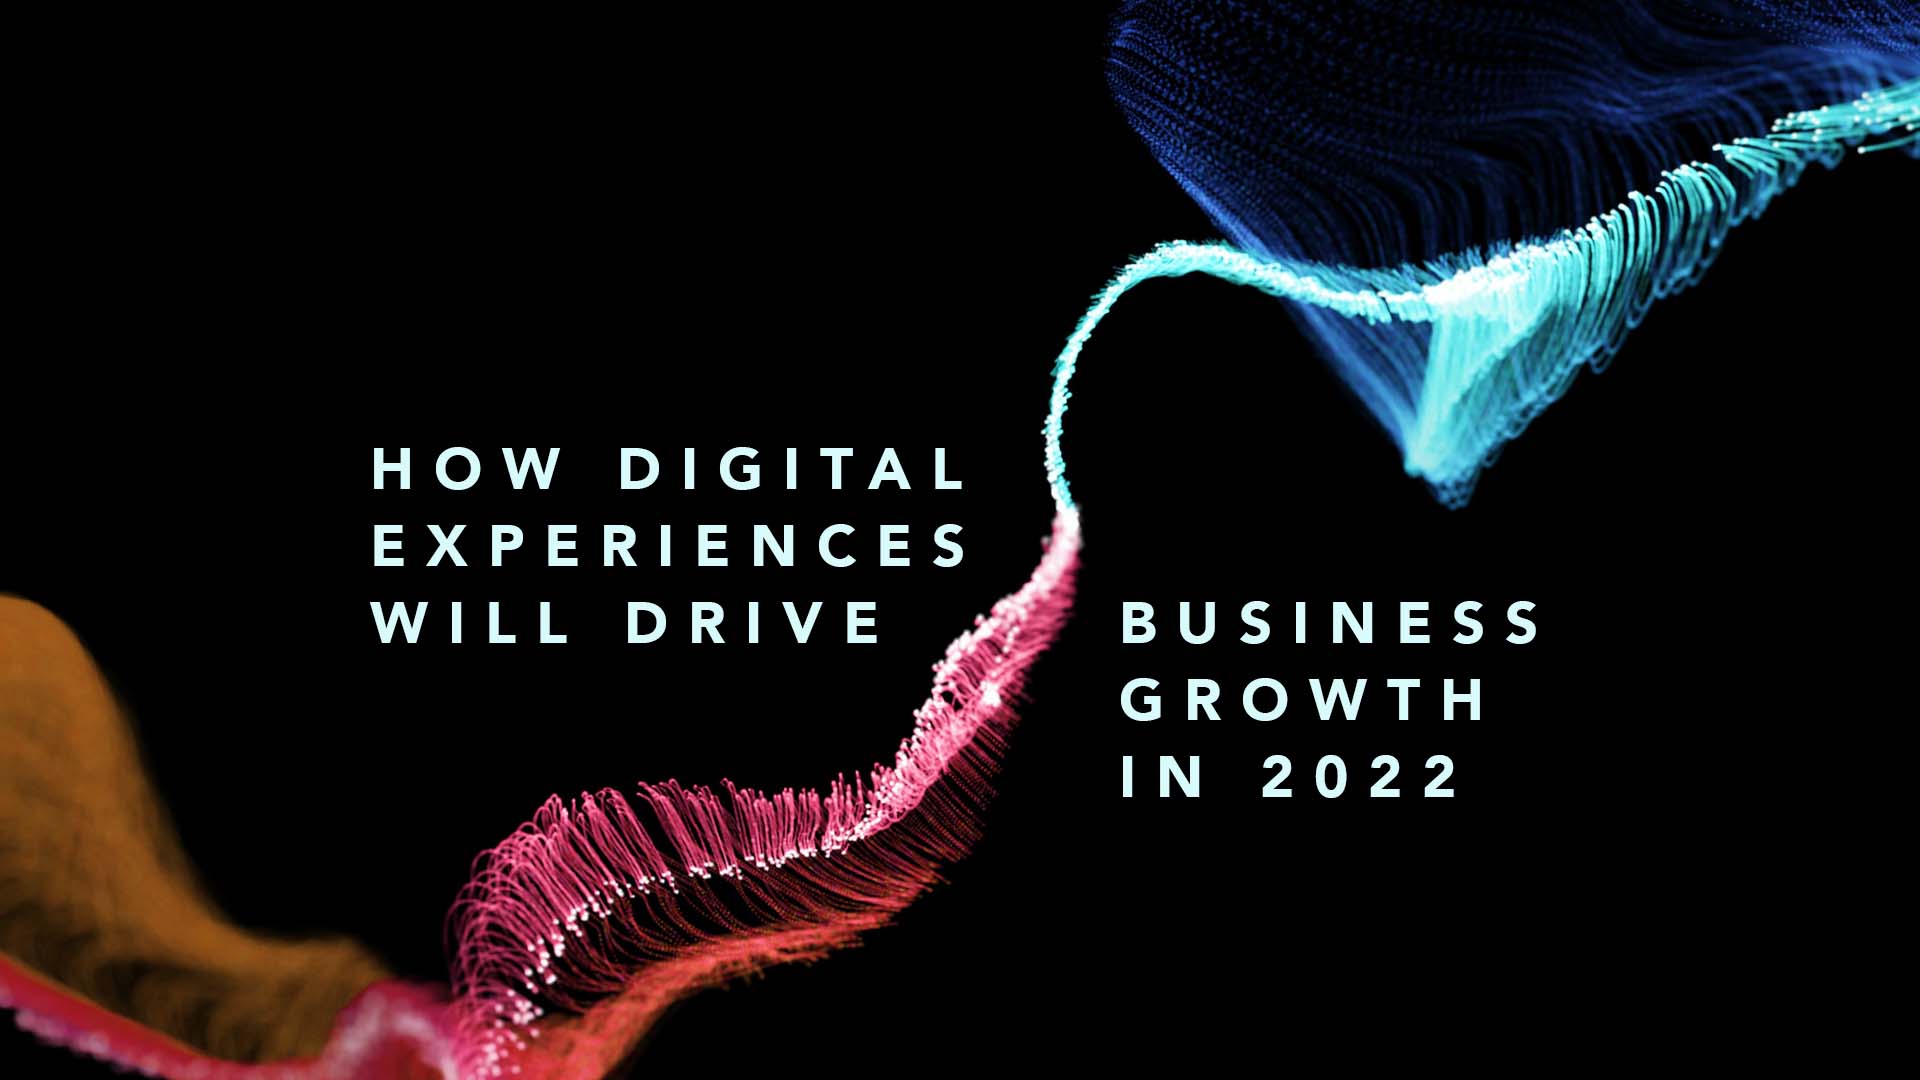 How Digital Experiences Will Drive Business Growth in 2022